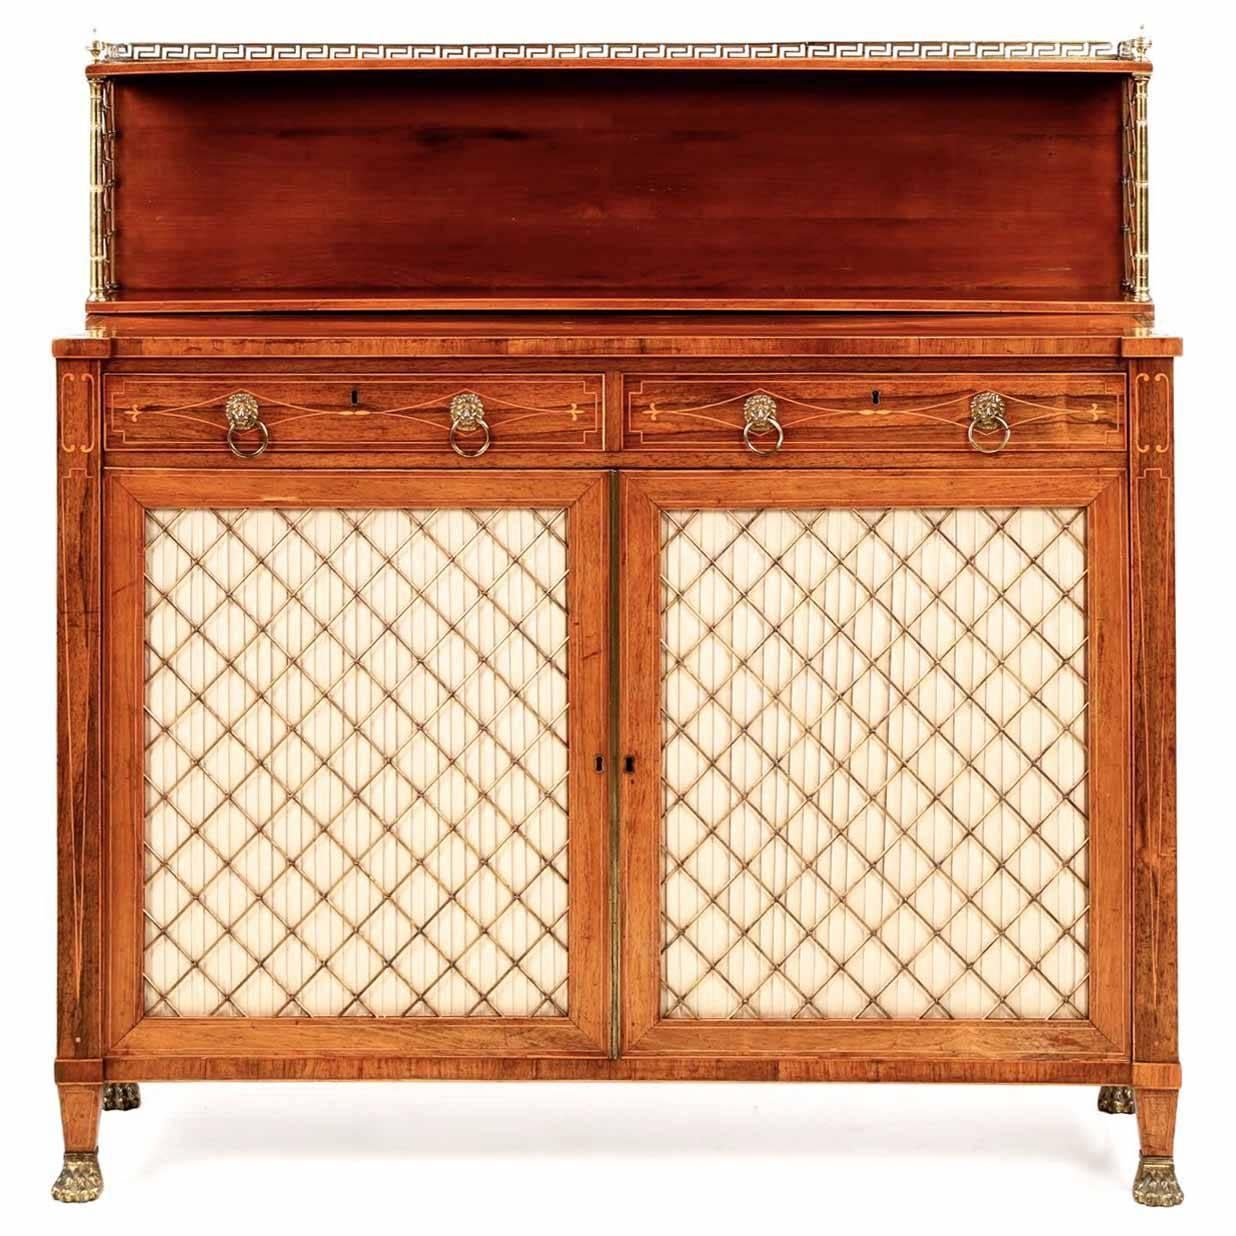 Of precise and exquisite craftsmanship, this inordinately fine chiffonier is finished in gorgeous mellowed rosewood veneers. Intricate displays of brass work and scrolling satinwood stringer inlays flow across the top of the case, the border a